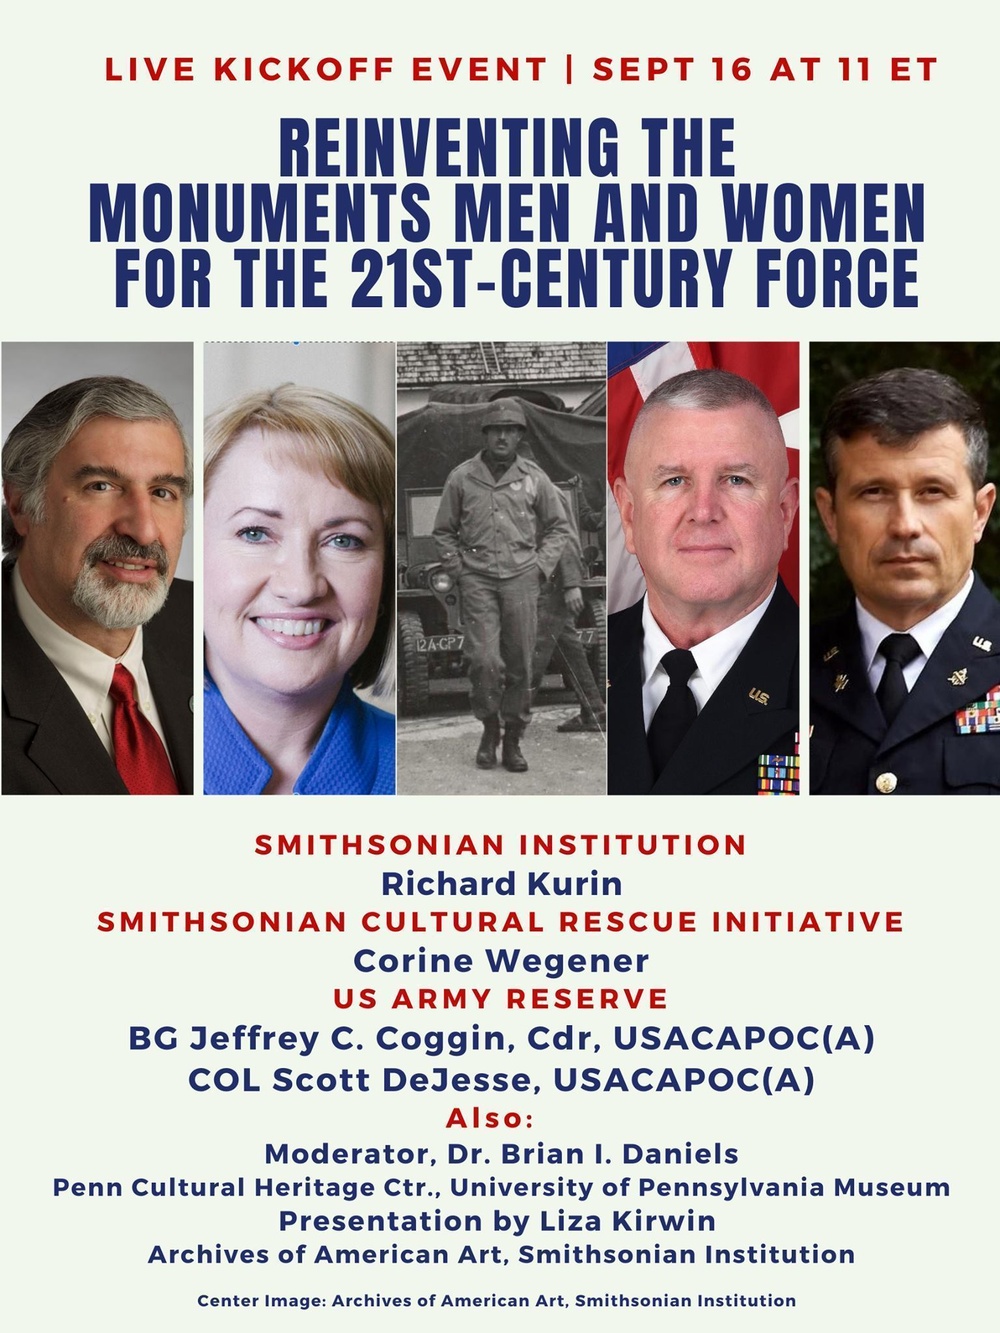 Monuments Men and Women for the 21st-Century Force